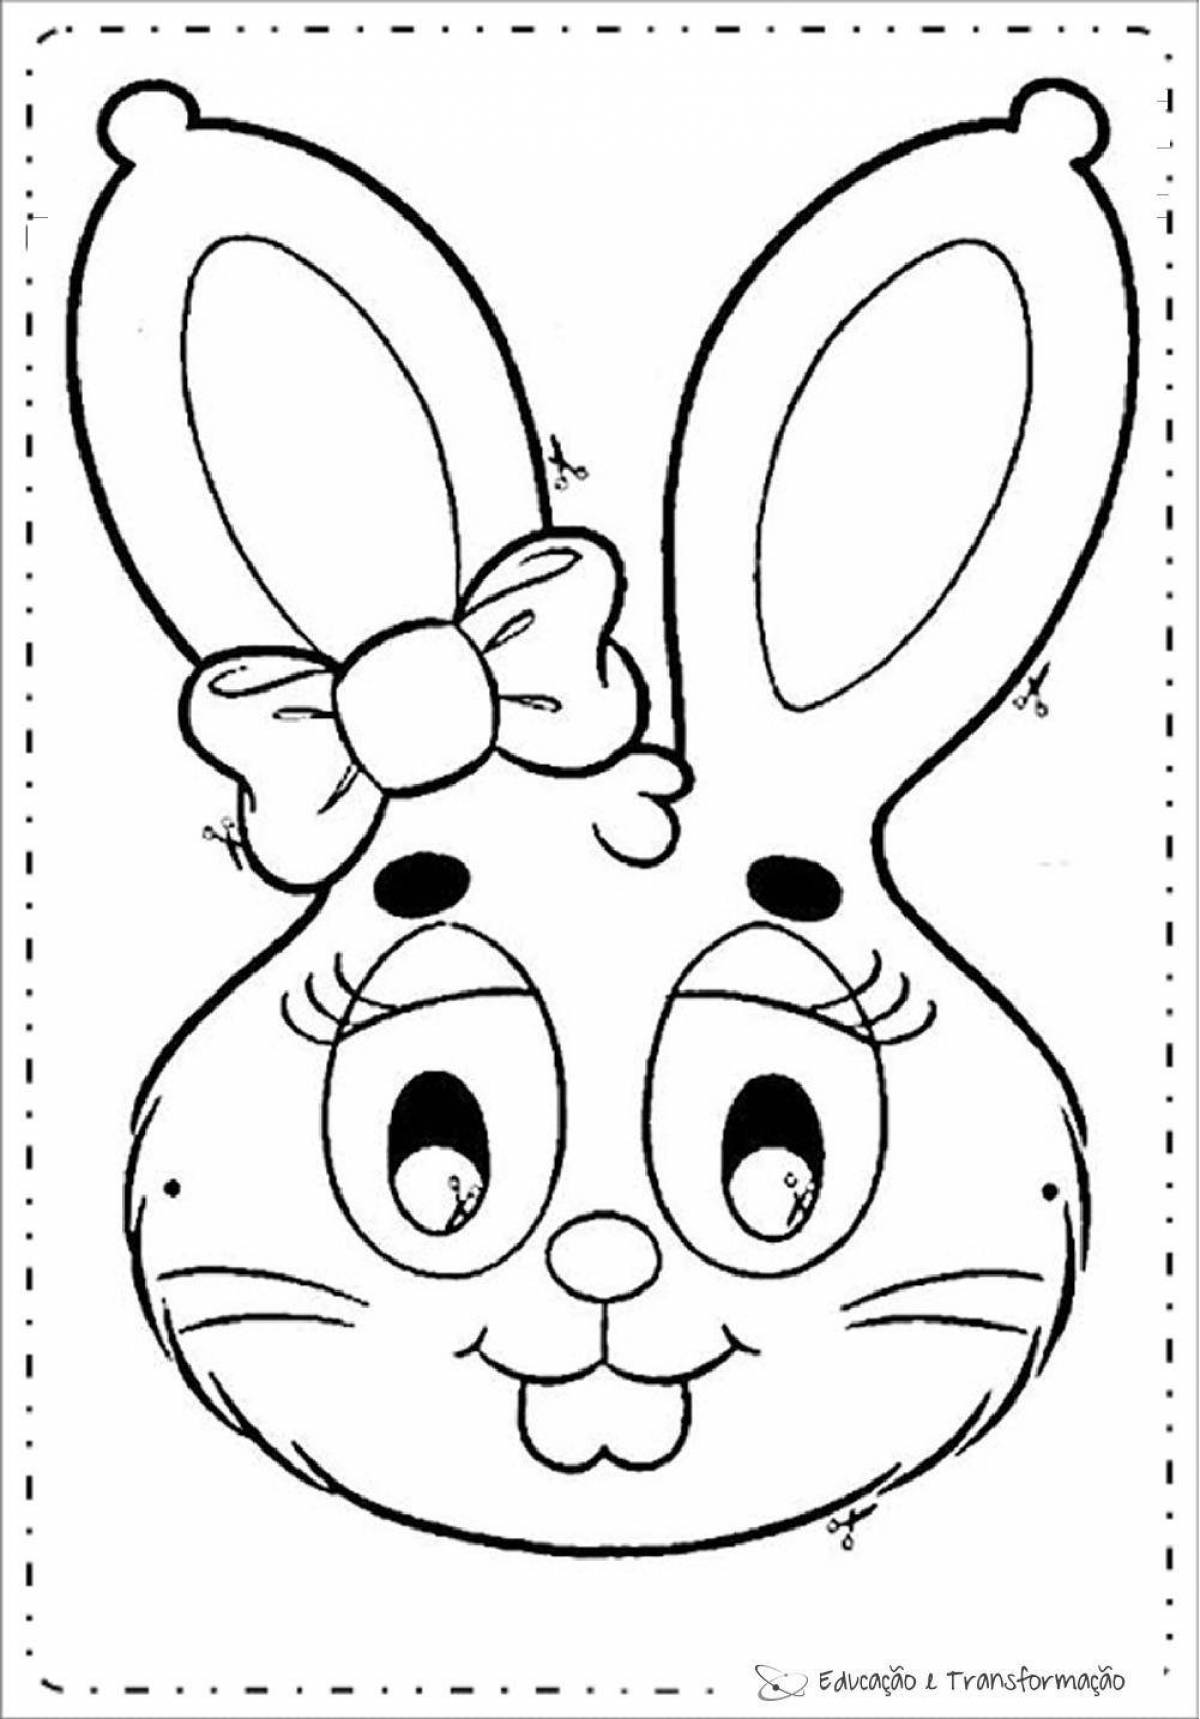 Rabbit mask coloring page with rich colors